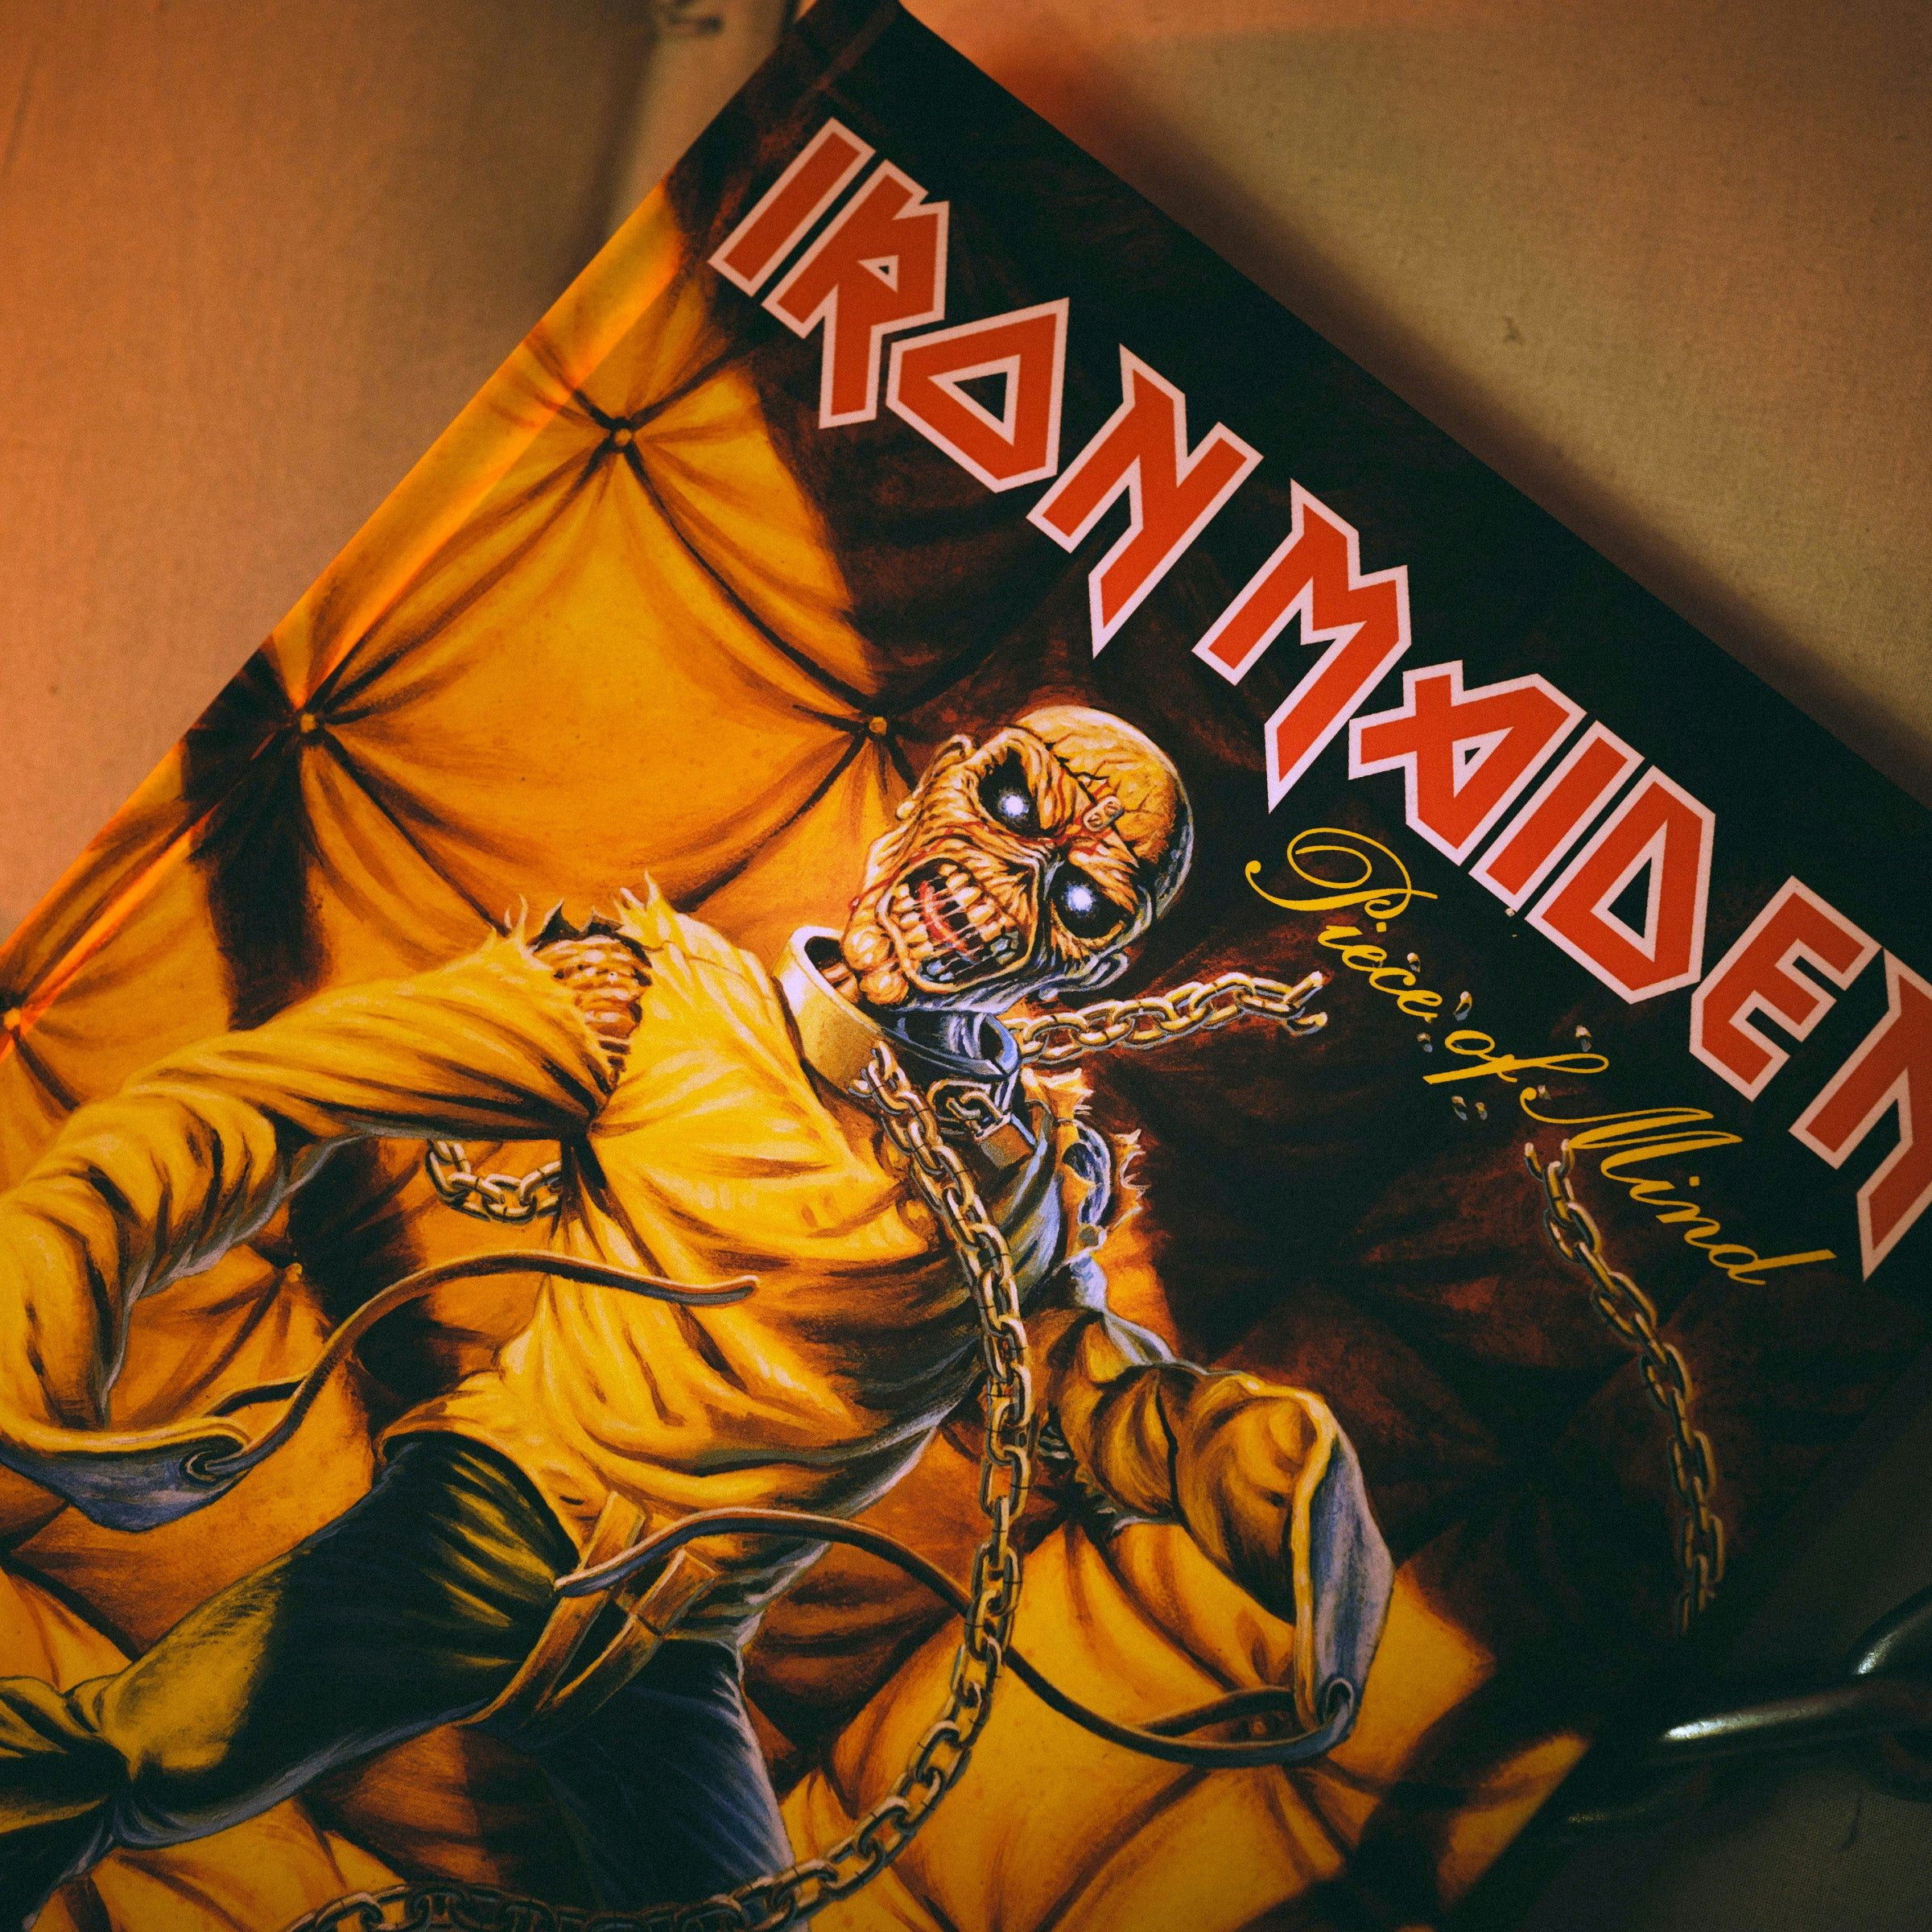 Iron Maiden Piece Of Mind - Deluxe Edition $150.00